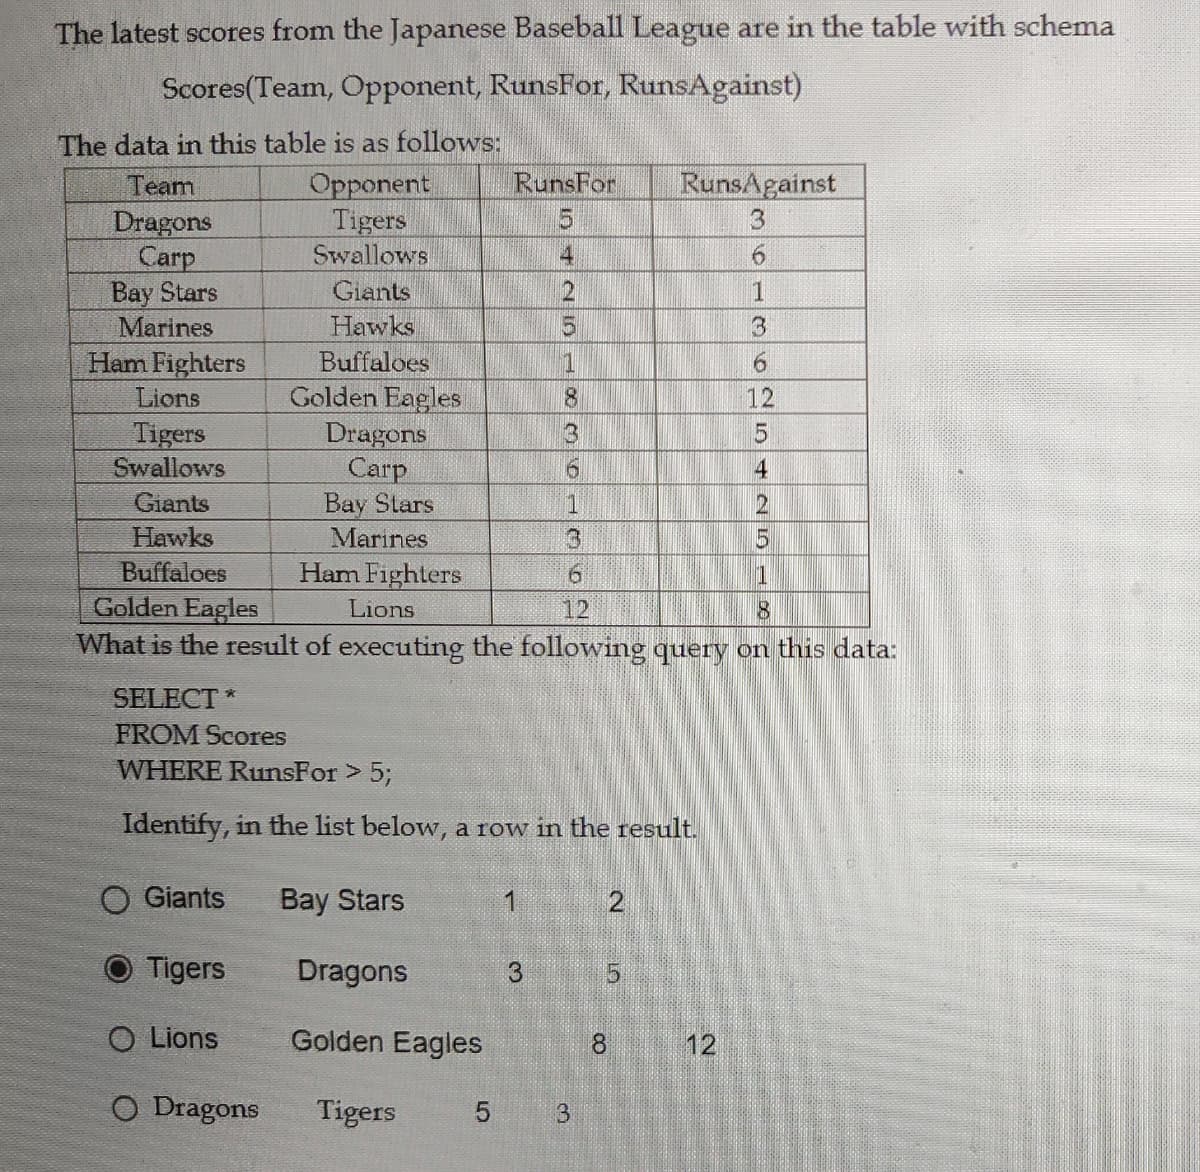 The latest scores from the Japanese Baseball League are in the table with schema
Scores(Team, Opponent, RunsFor, Runs Against)
The data in this table is as follows:
Opponent
Tigers
Swallows
Giants
Hawks
Buffaloes
Golden Eagles
Dragons
Carp
Bay Stars
Marines
Ham Fighters
1
Golden Eagles
Lions
12
8
What is the result of executing the following query on this data:
Team
Dragons
Carp
Bay Stars
Marines
Ham Fighters
Lions
Tigers
Swallows
Giants
Hawks
Buffaloes
RunsFor RunsAgainst
3
6
1
SELECT *
FROM Scores
WHERE RunsFor > 5;
Identify, in the list below, a row in the result.
O Giants
Bay Stars
Tigers
Dragons
O Lions
Golden Eagles
O Dragons
Tigers 5
1
1042503 LEGE
3
3
2
5
8
12
8625
12
4
25